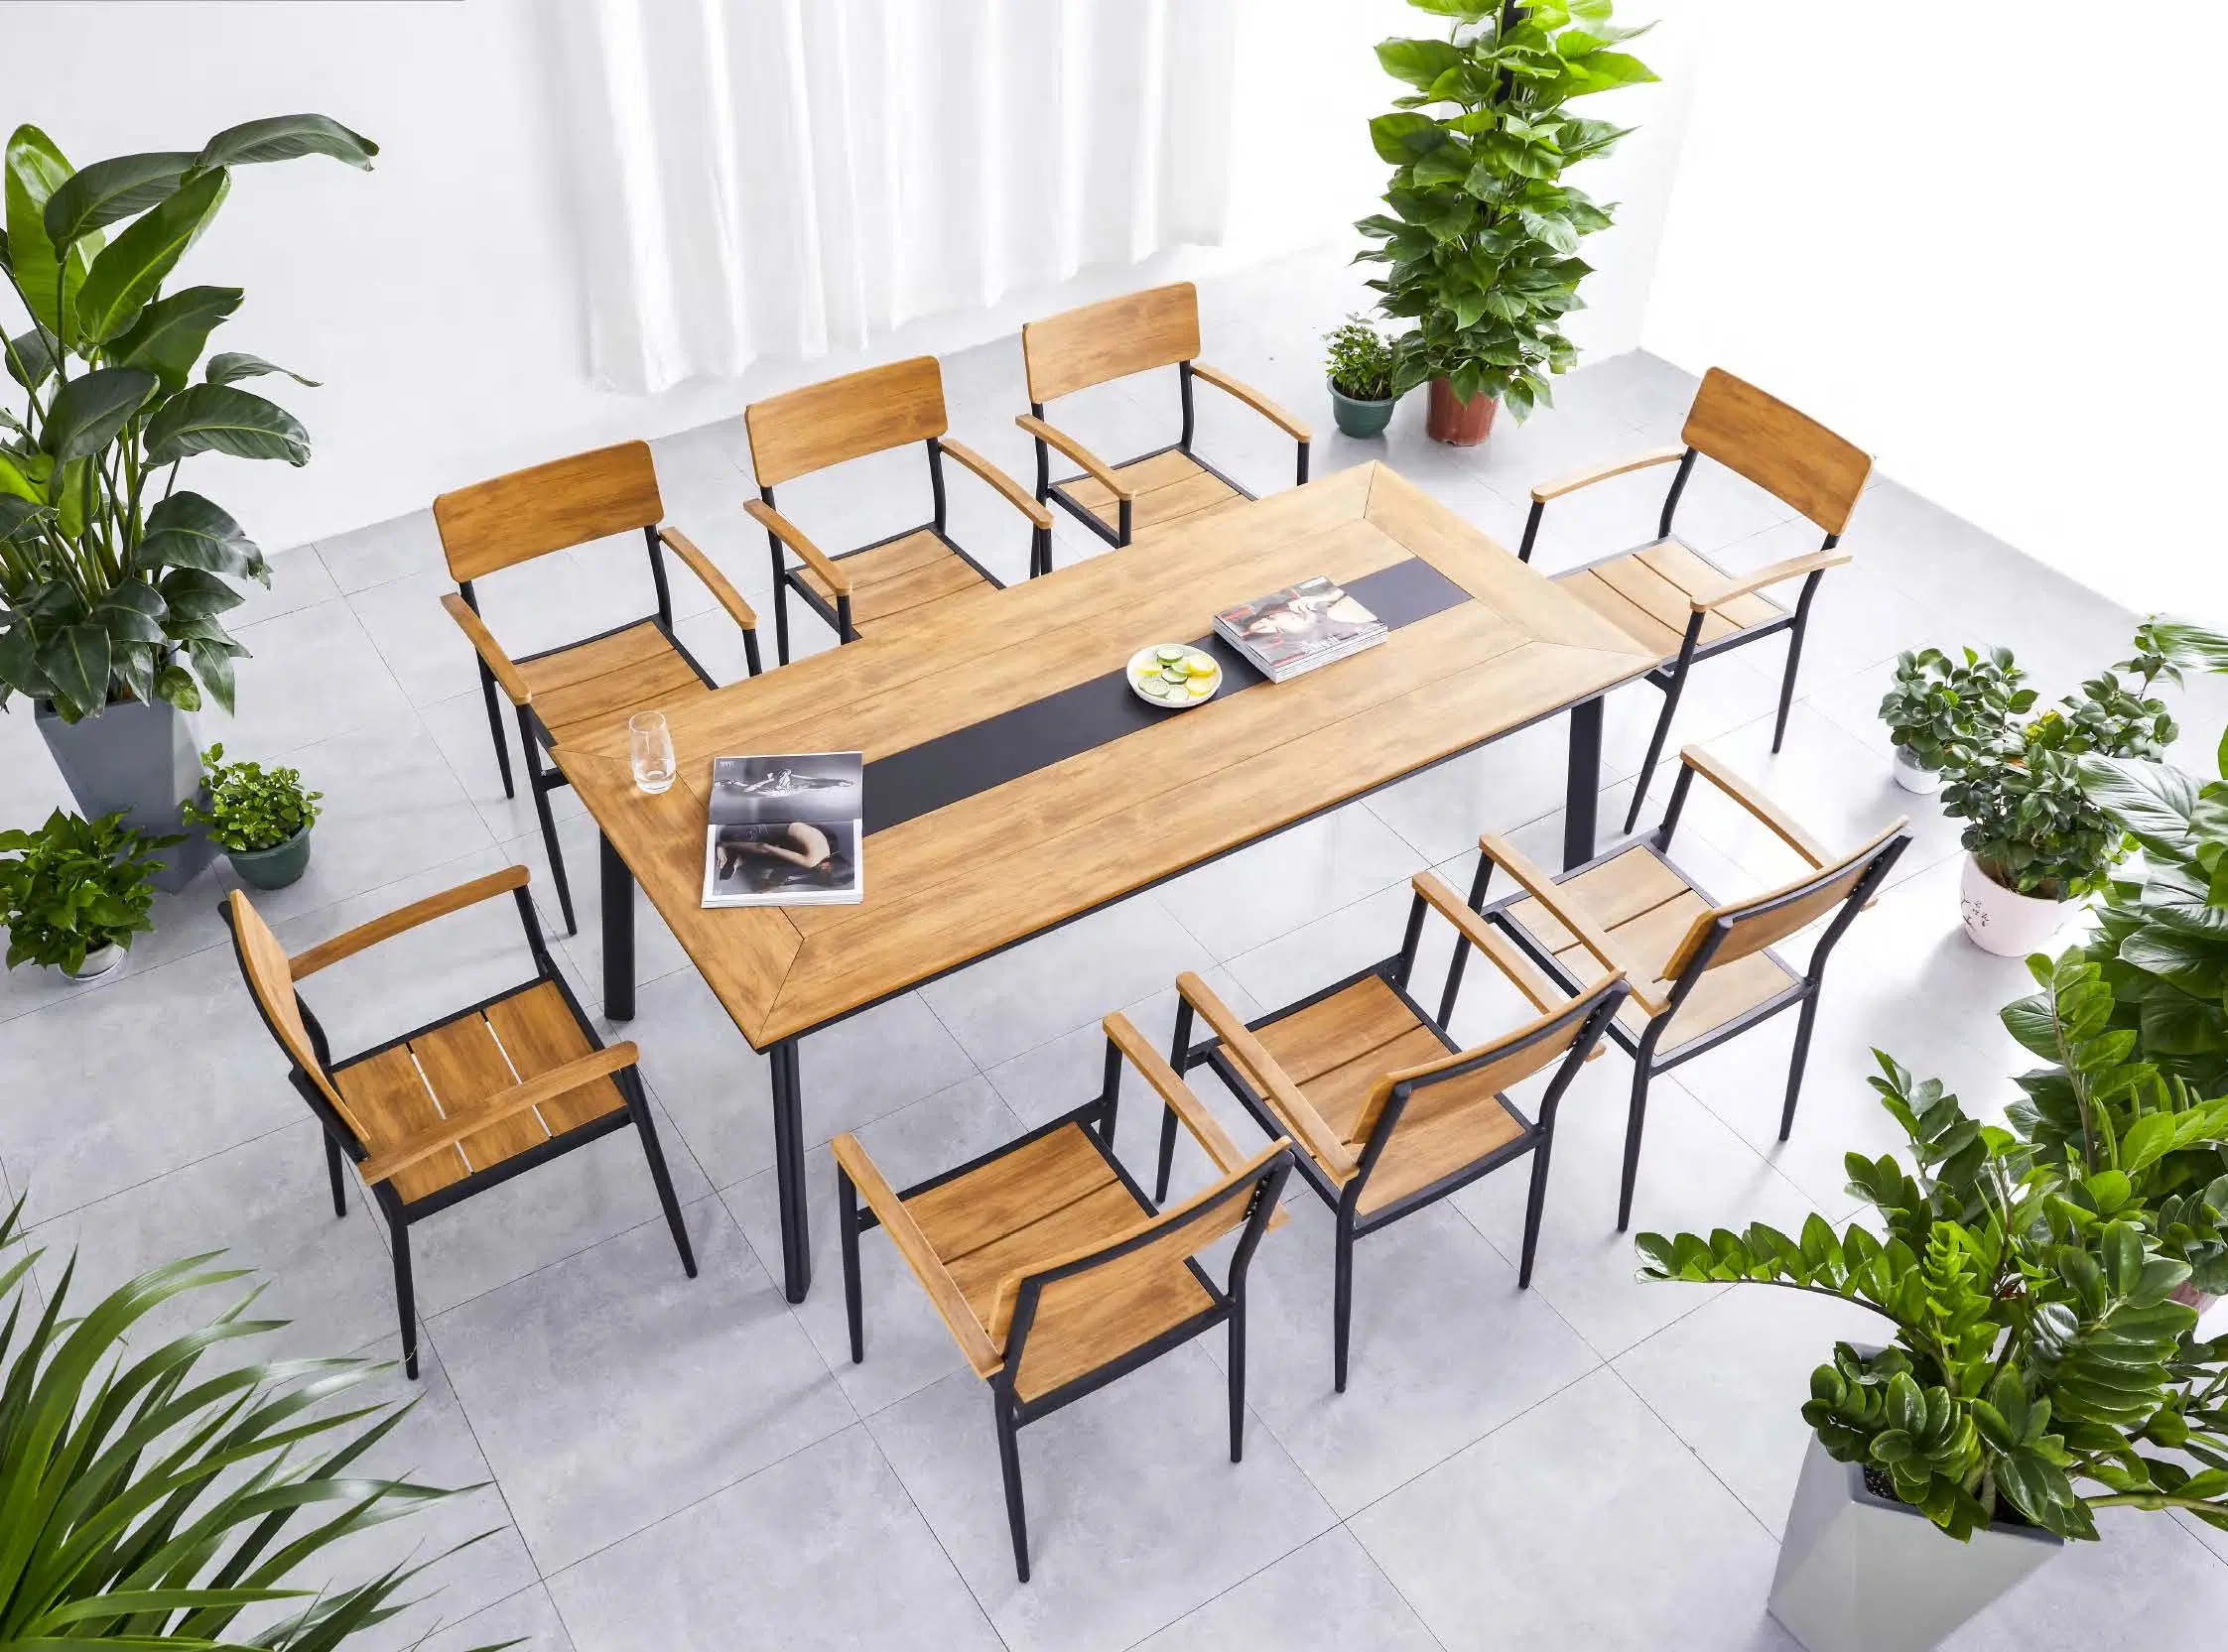 Outdoor Plastic Wood Tables and Chairs Garden Anti-Corrosion Wood Waterproof Sun Protection Outdoor Balcony Garden Dining Sets